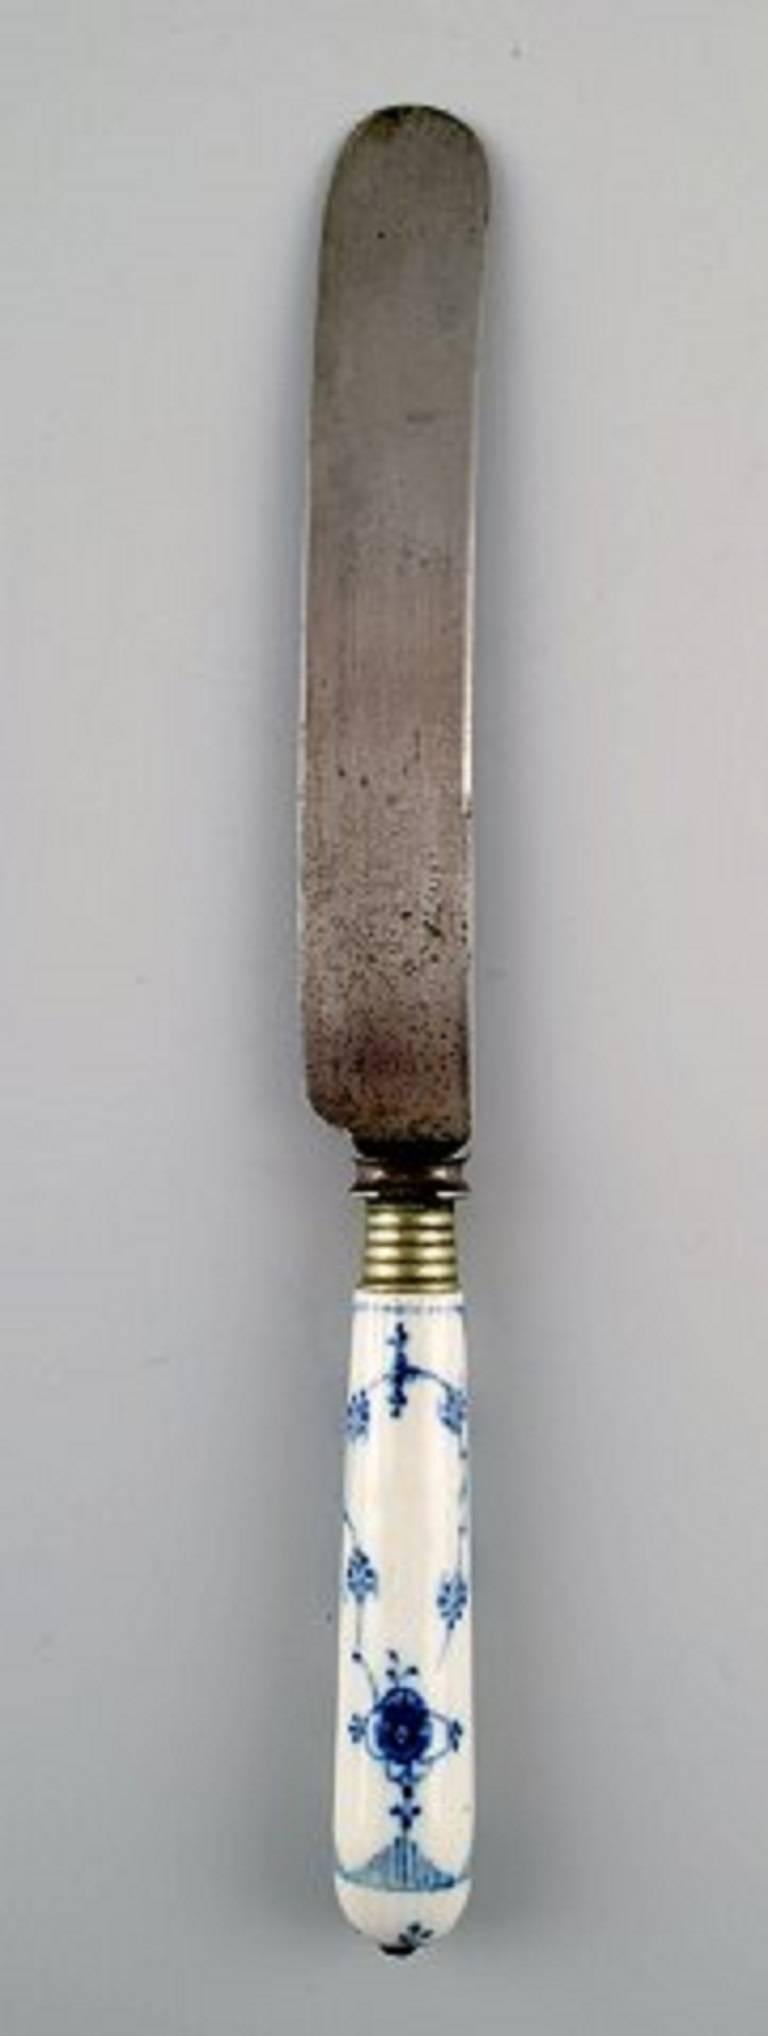 Blue fluted plain, four dinner knives from Royal Copenhagen / Raadvad.
Early 1900s.
Measures: 25.5 cm.
In very good condition.